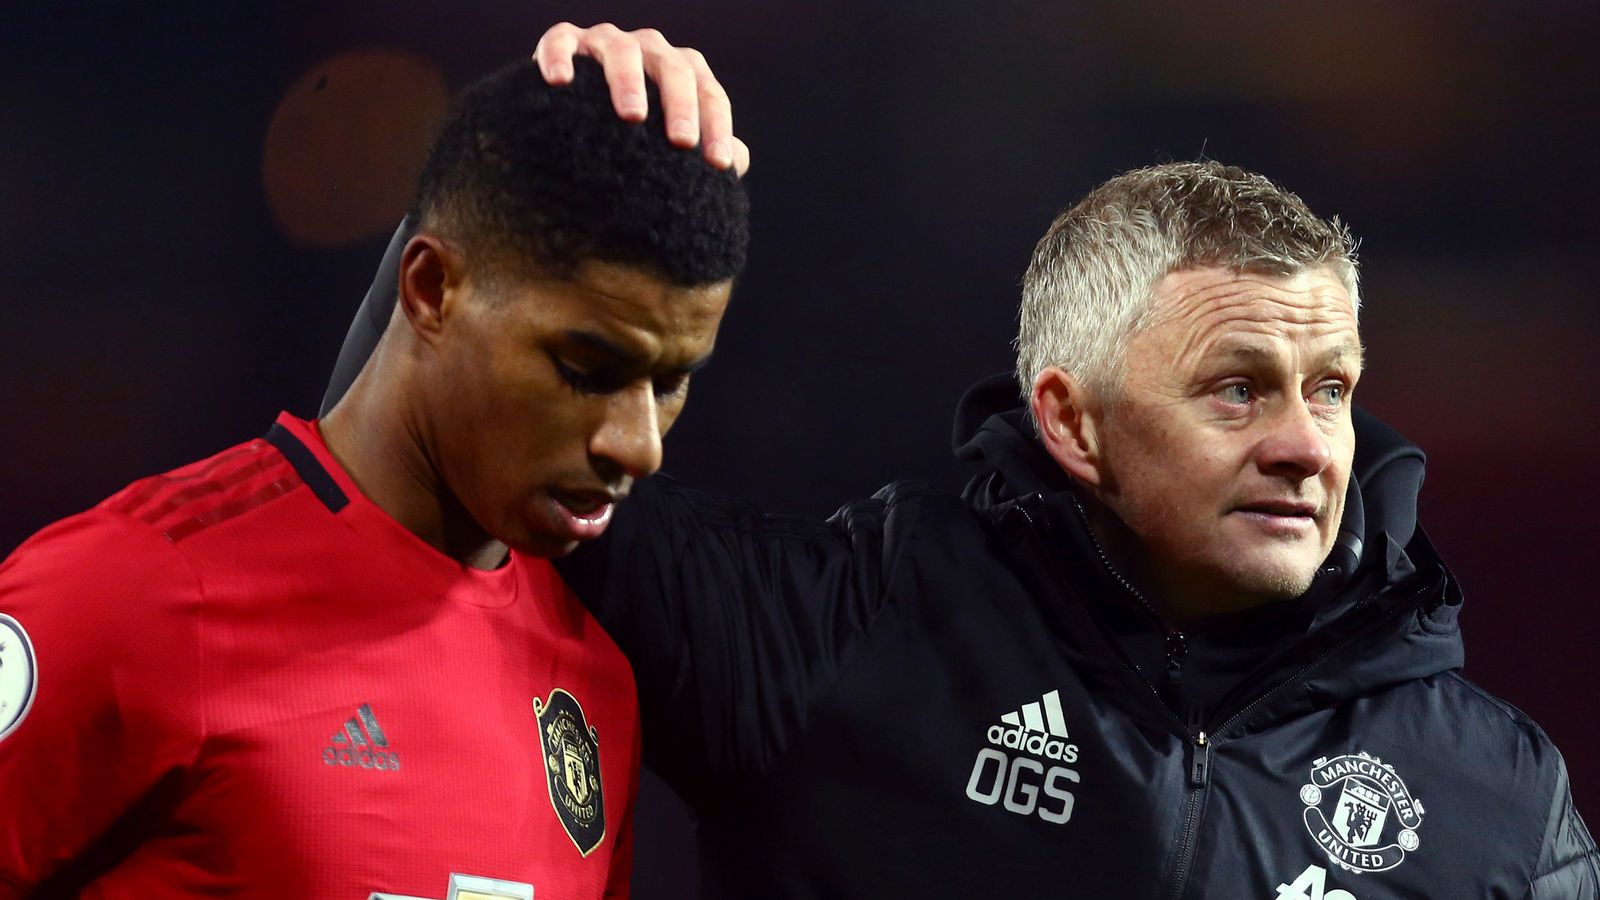 Marcus Rashford exclusive: Ole Gunnar Solskjaer told Man Utd players to stick together - and we will